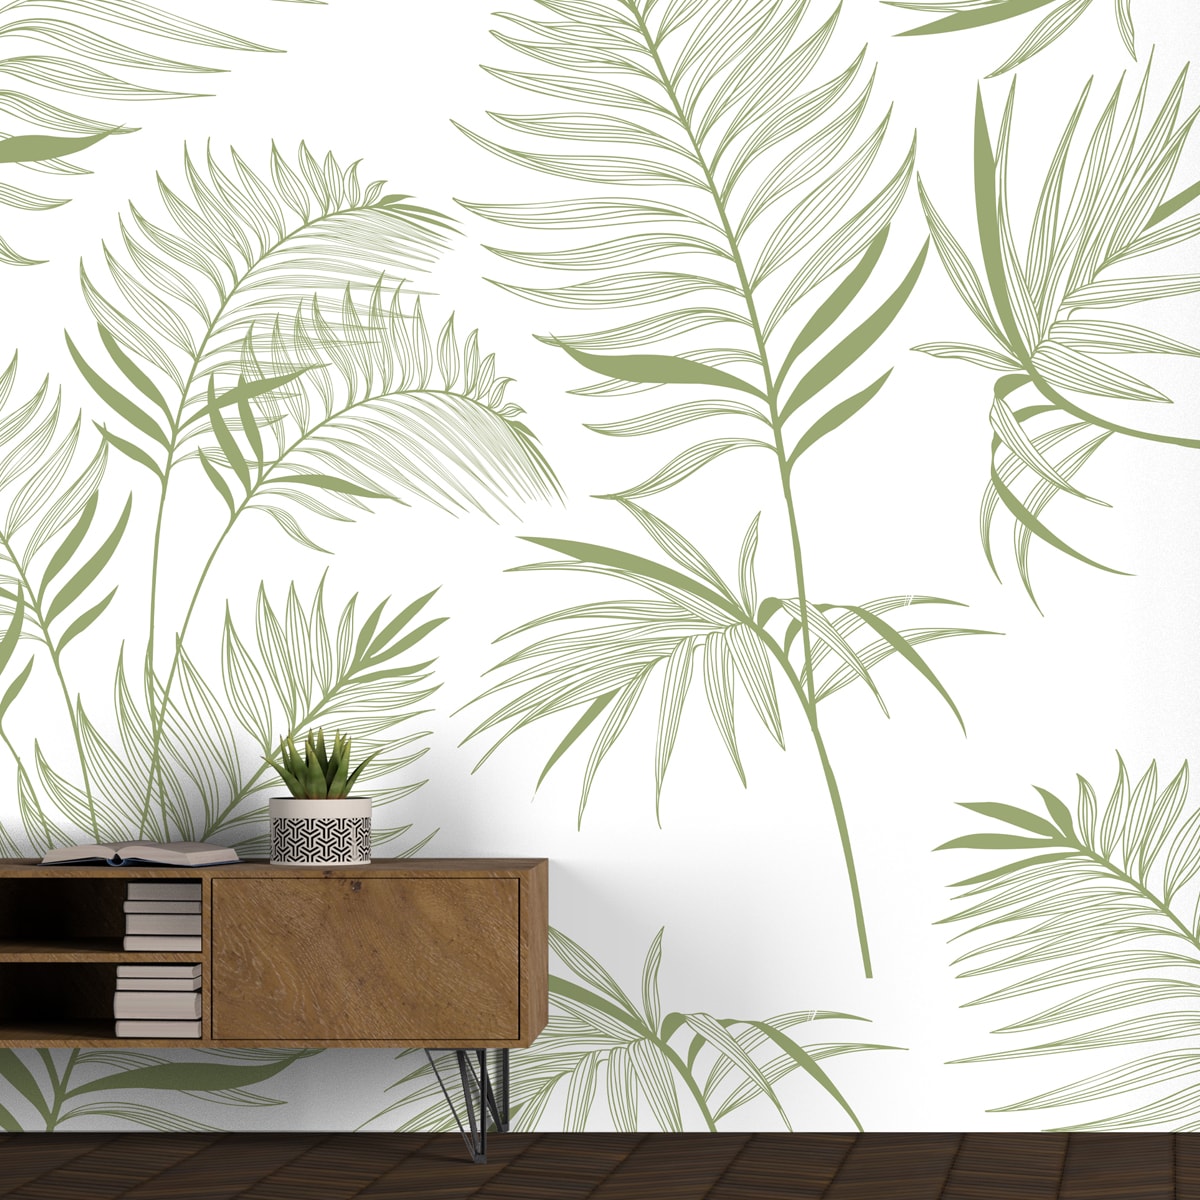 Harmony, Subtle Green Leaves in White Wallpaper Design | Life n Colors